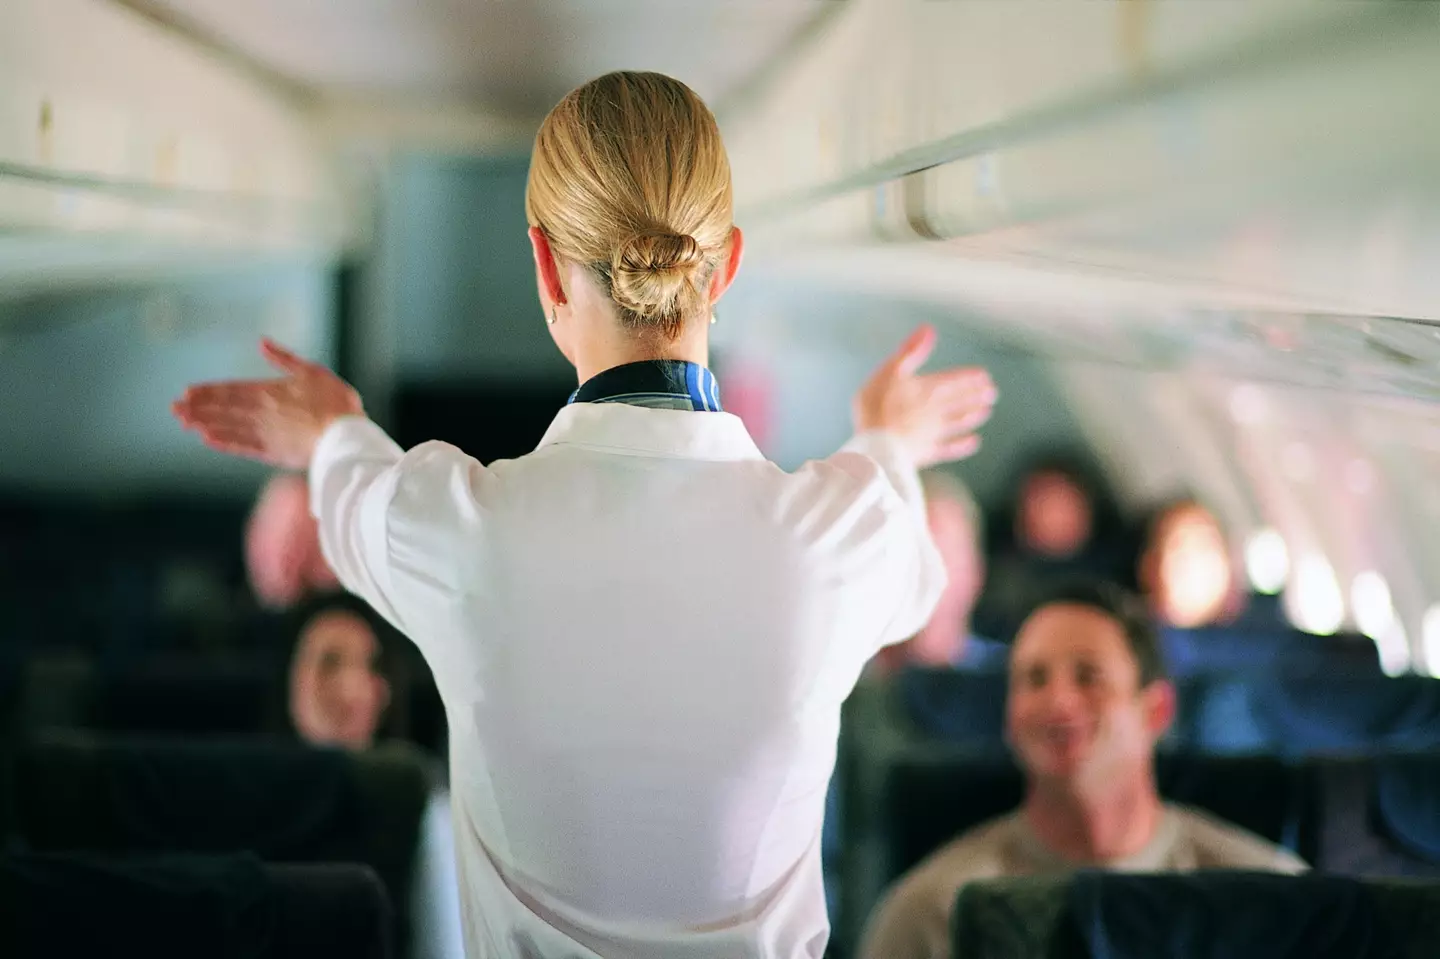 Flight attendants may be likely to be unfaithful.